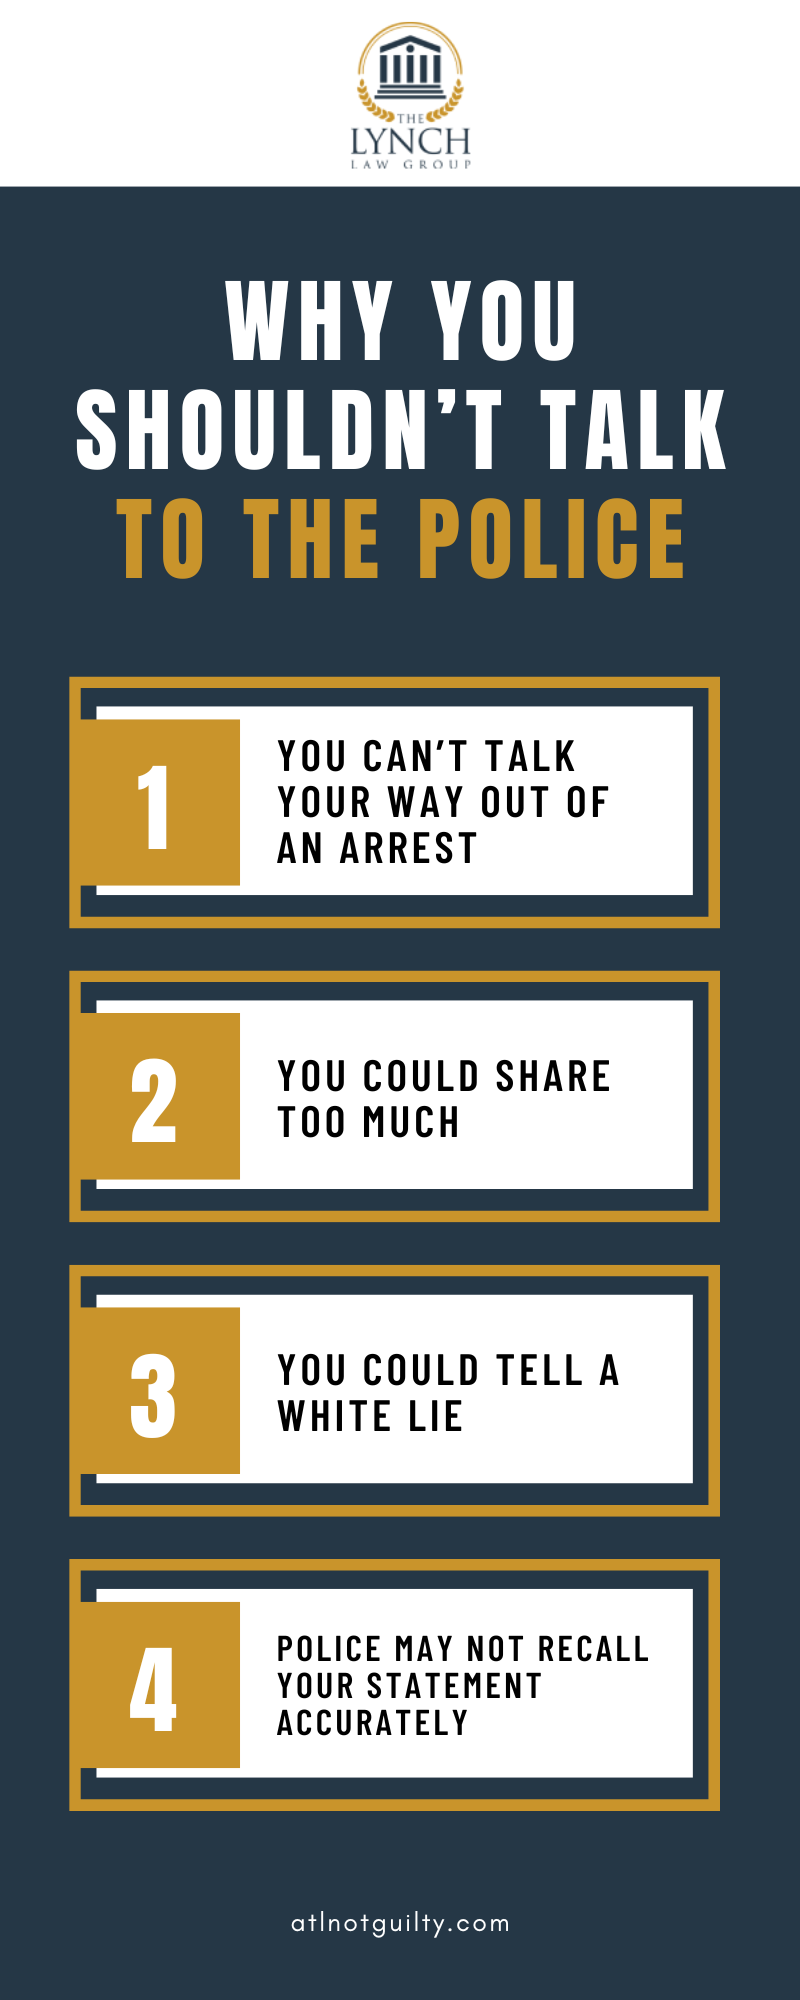 Why You Shouldn't Talk To The Police Infographic